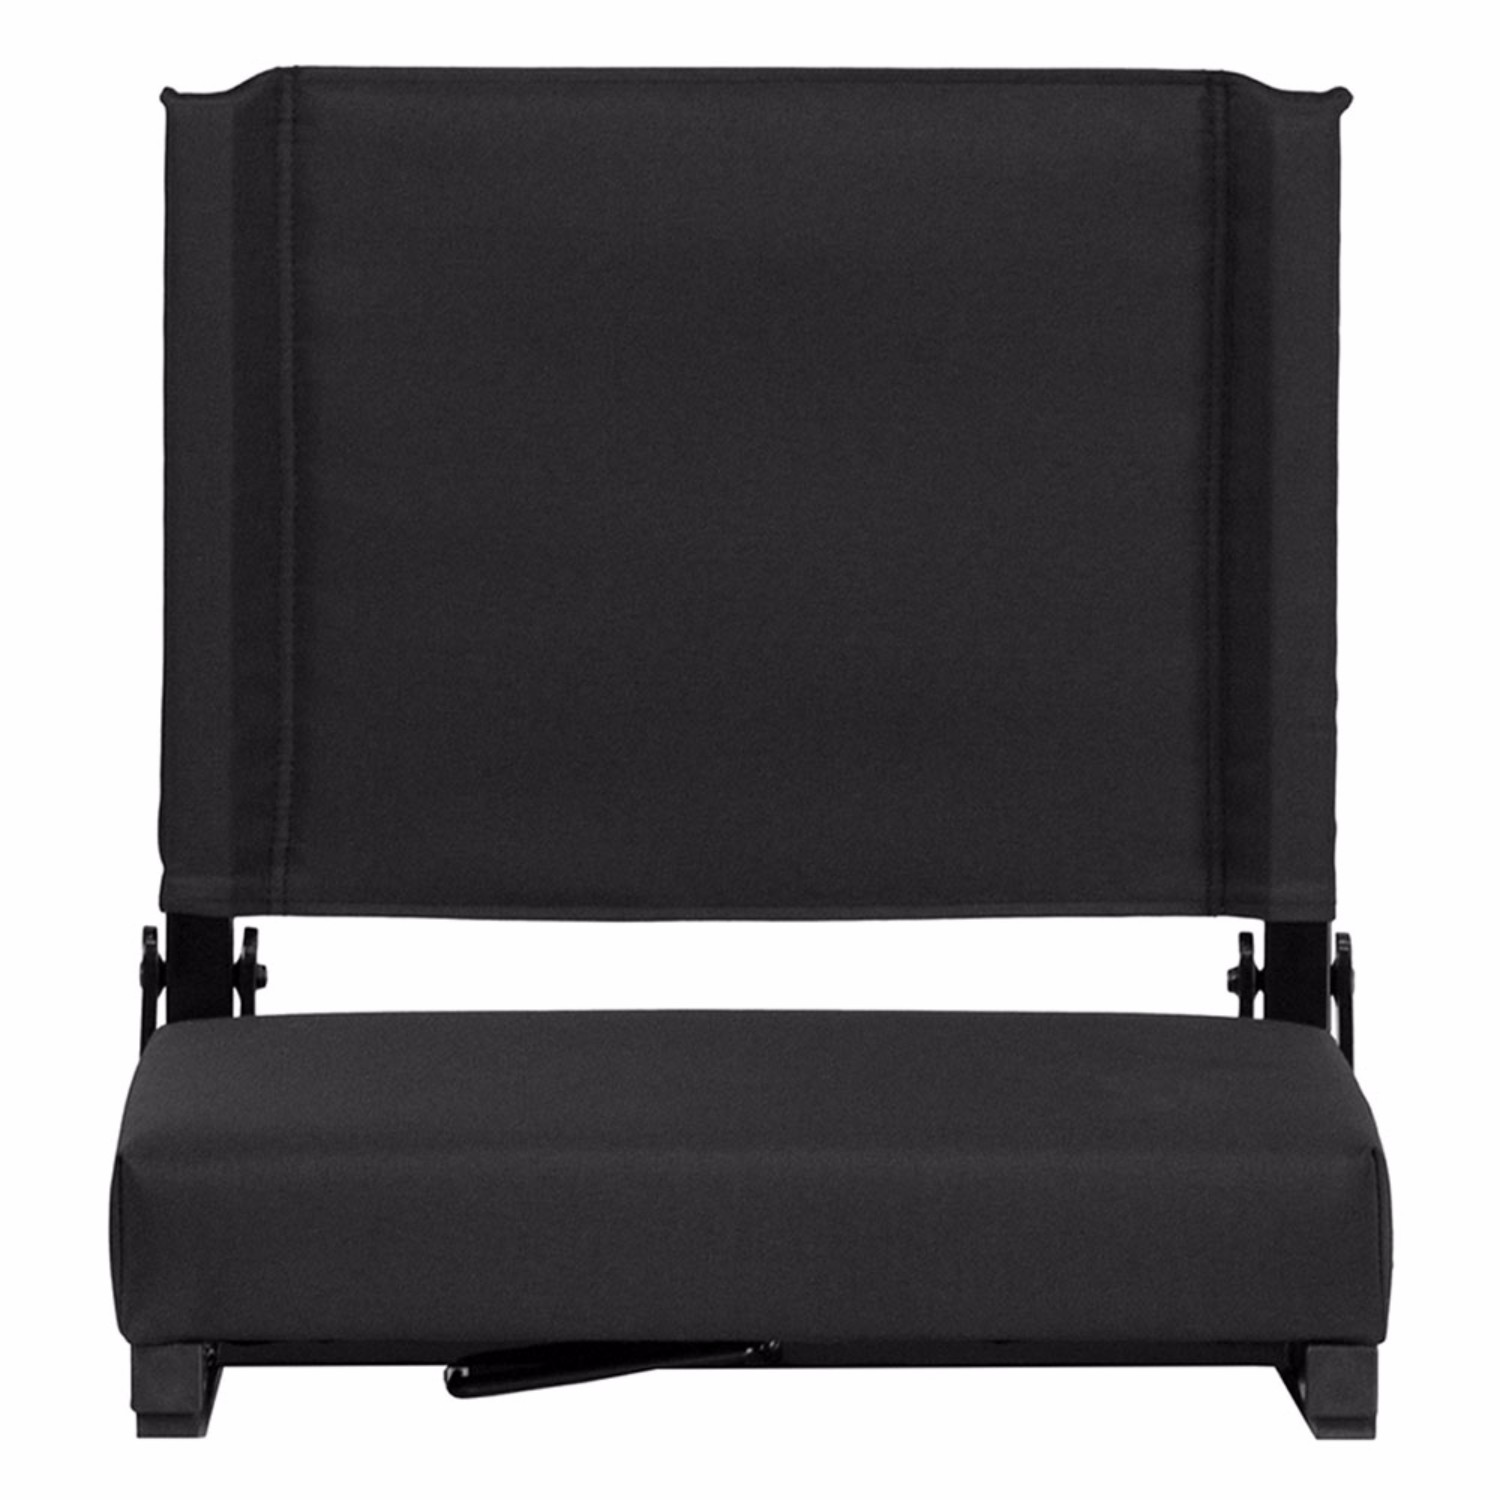 Grandstand Comfort Seats by Flash with 500 LB. Weight Capacity Lightweight Aluminum Frame and Ultra-Padded Seat in Black